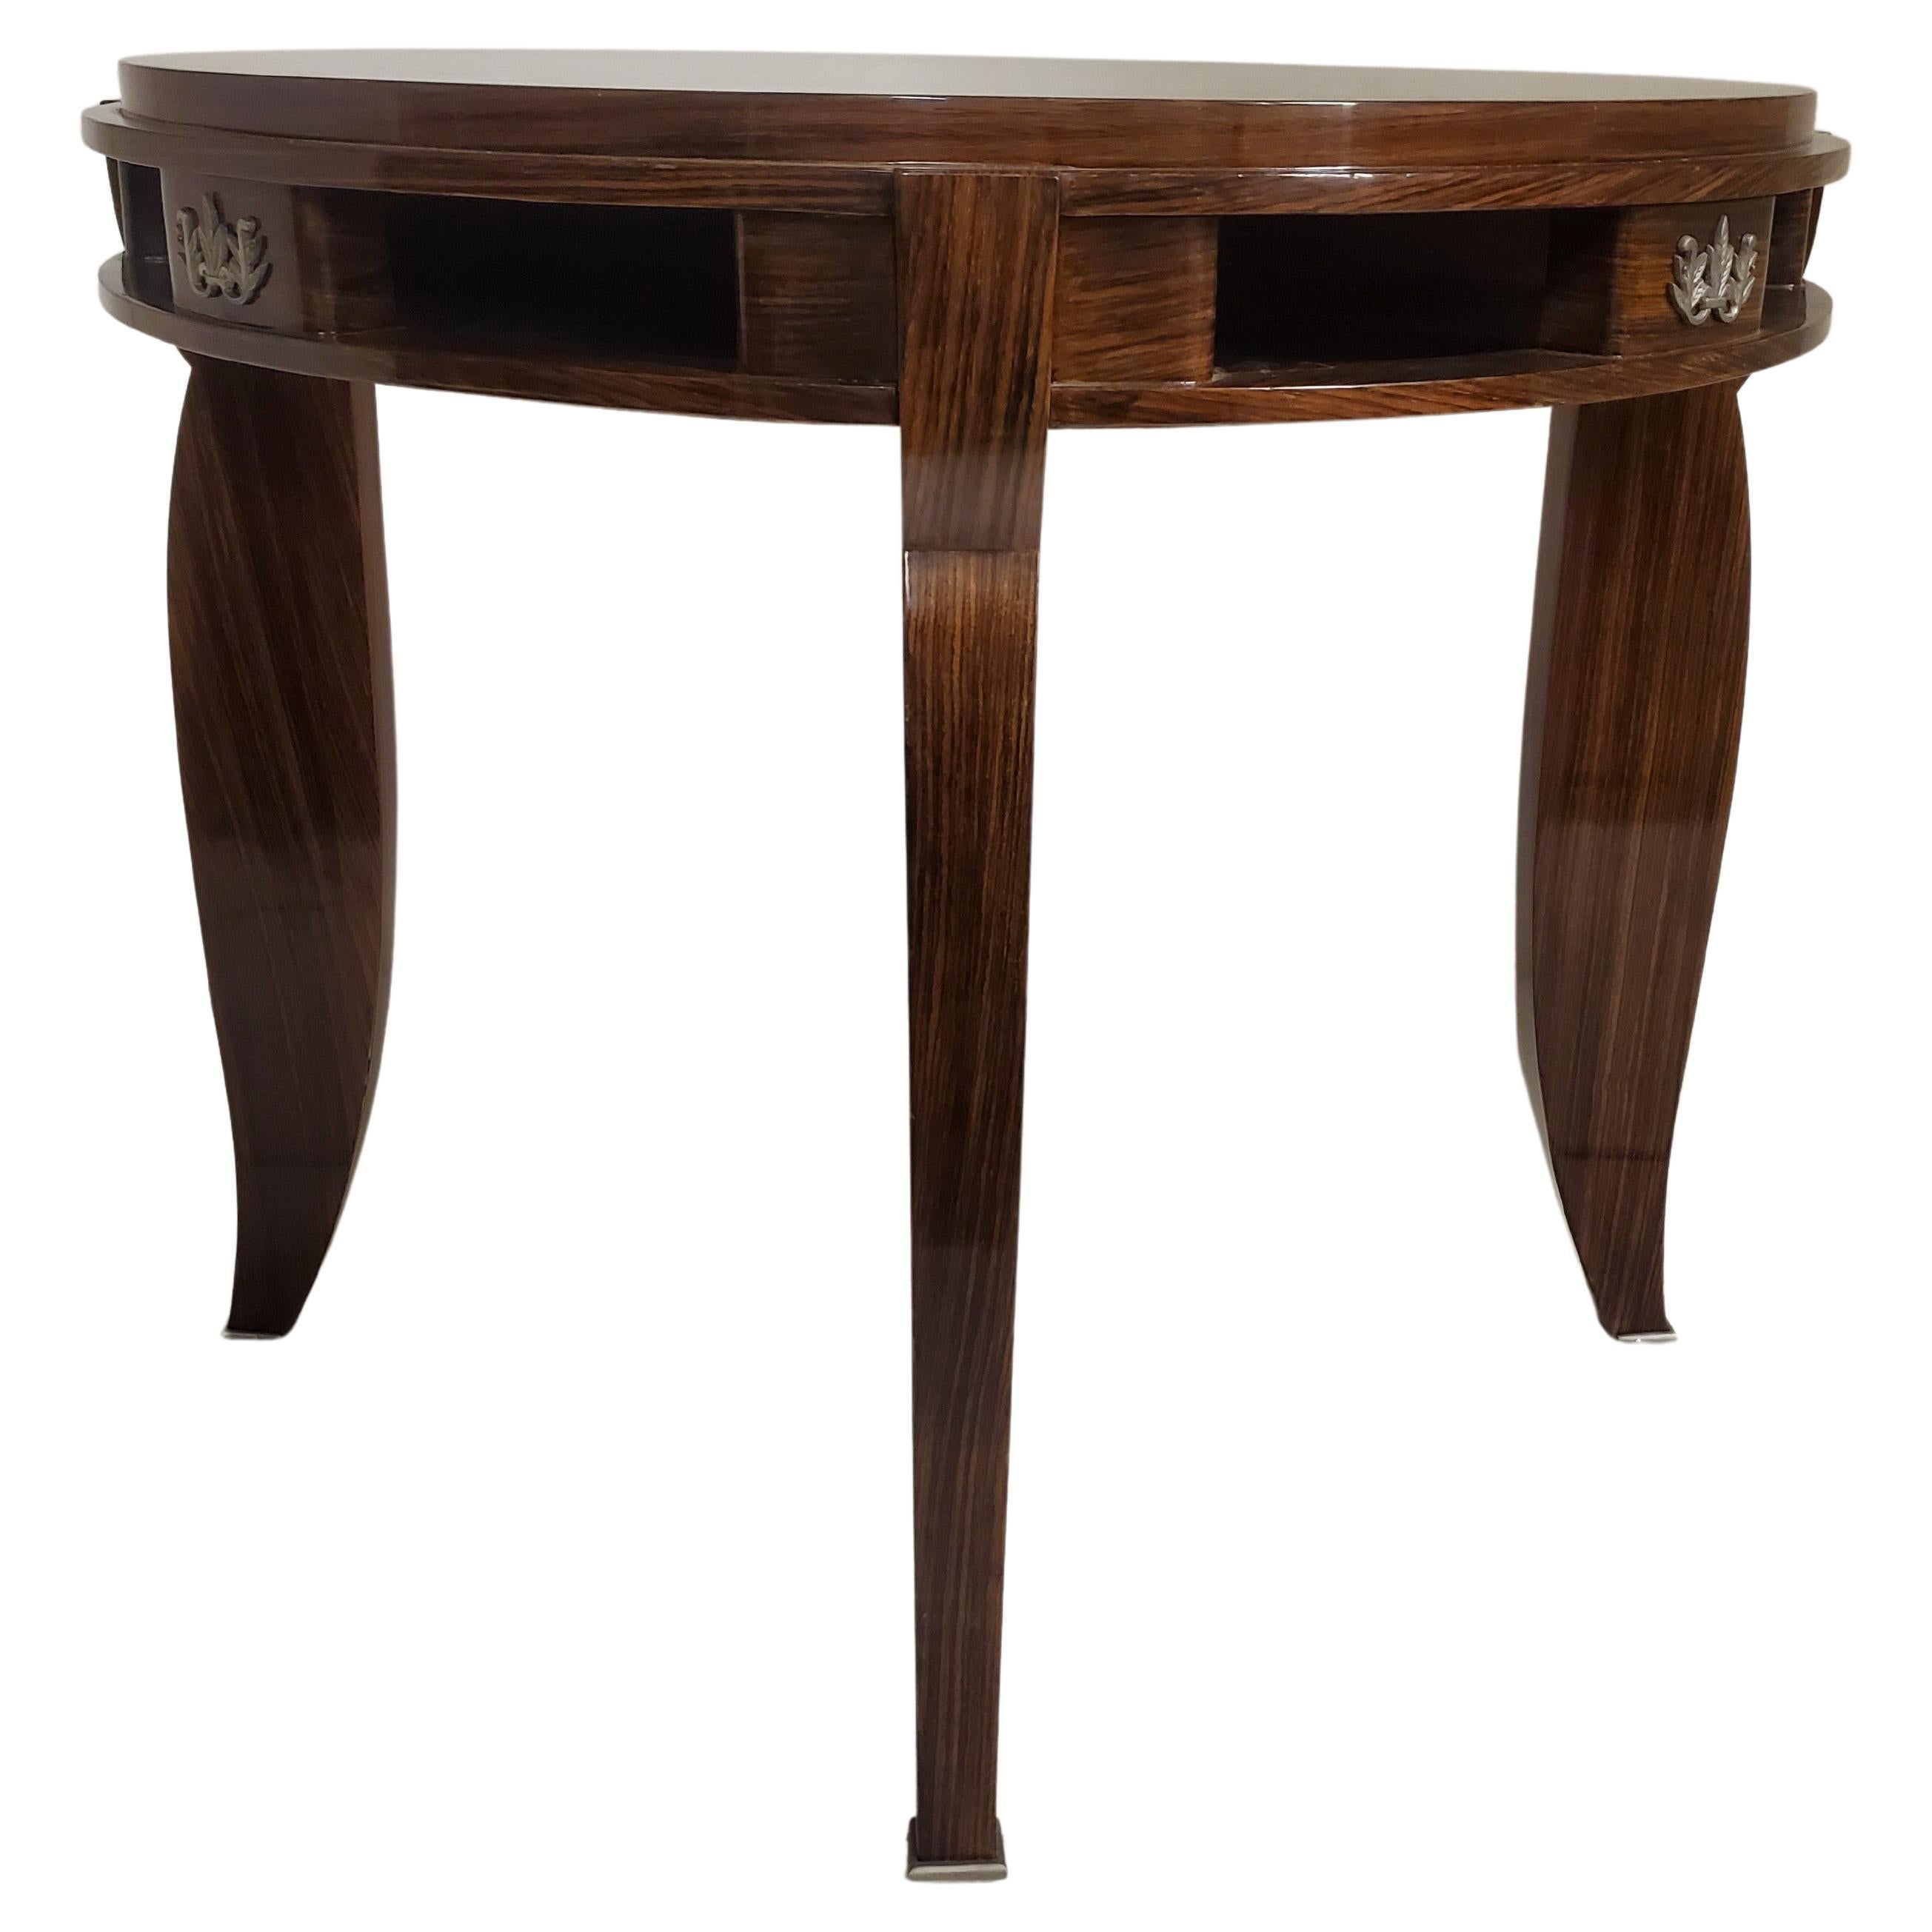 A fine Fine French Art Deco circular end/ side/ center/ card/ game / dining table attributed to the renowned designer Jules Leleu. The striking round top is inlaid with a mesmerizing parquetry pattern, meticulously crafted from the finest palisander